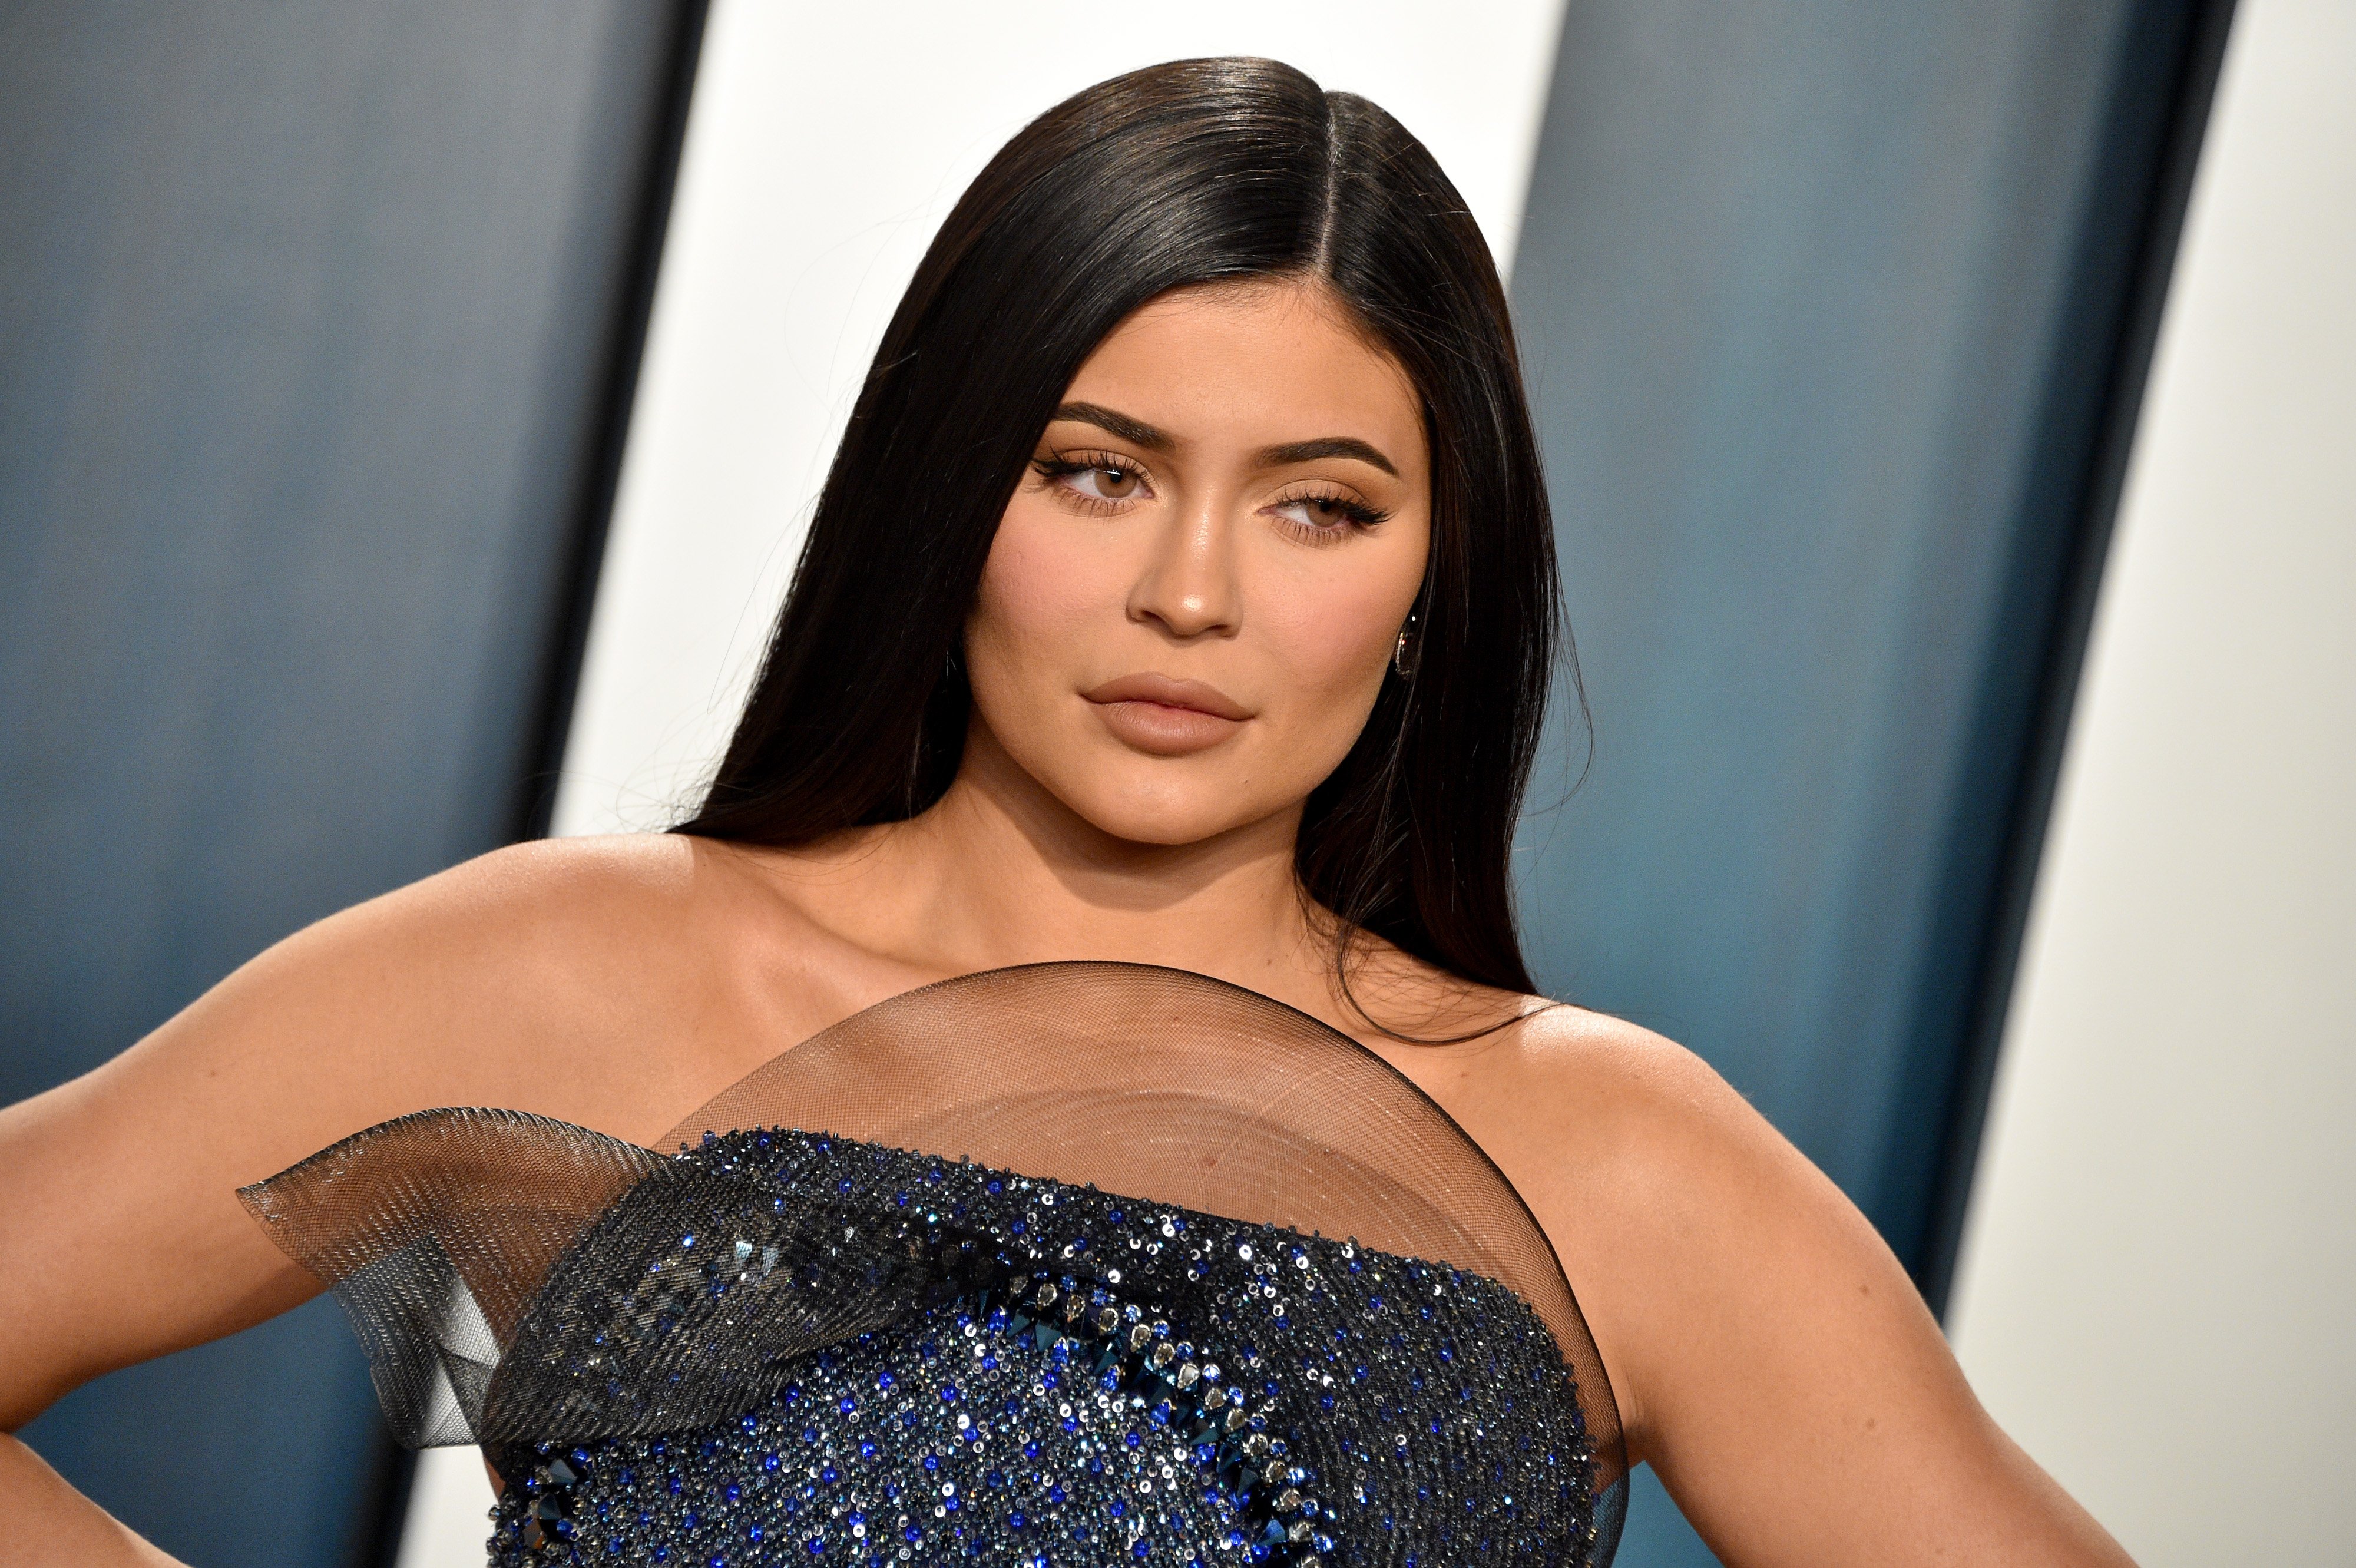 Kylie Jenner poses at the 2020 Vanity Fair Oscar Party on February 09, 2020 in Beverly Hills, California. | Source: Getty Images